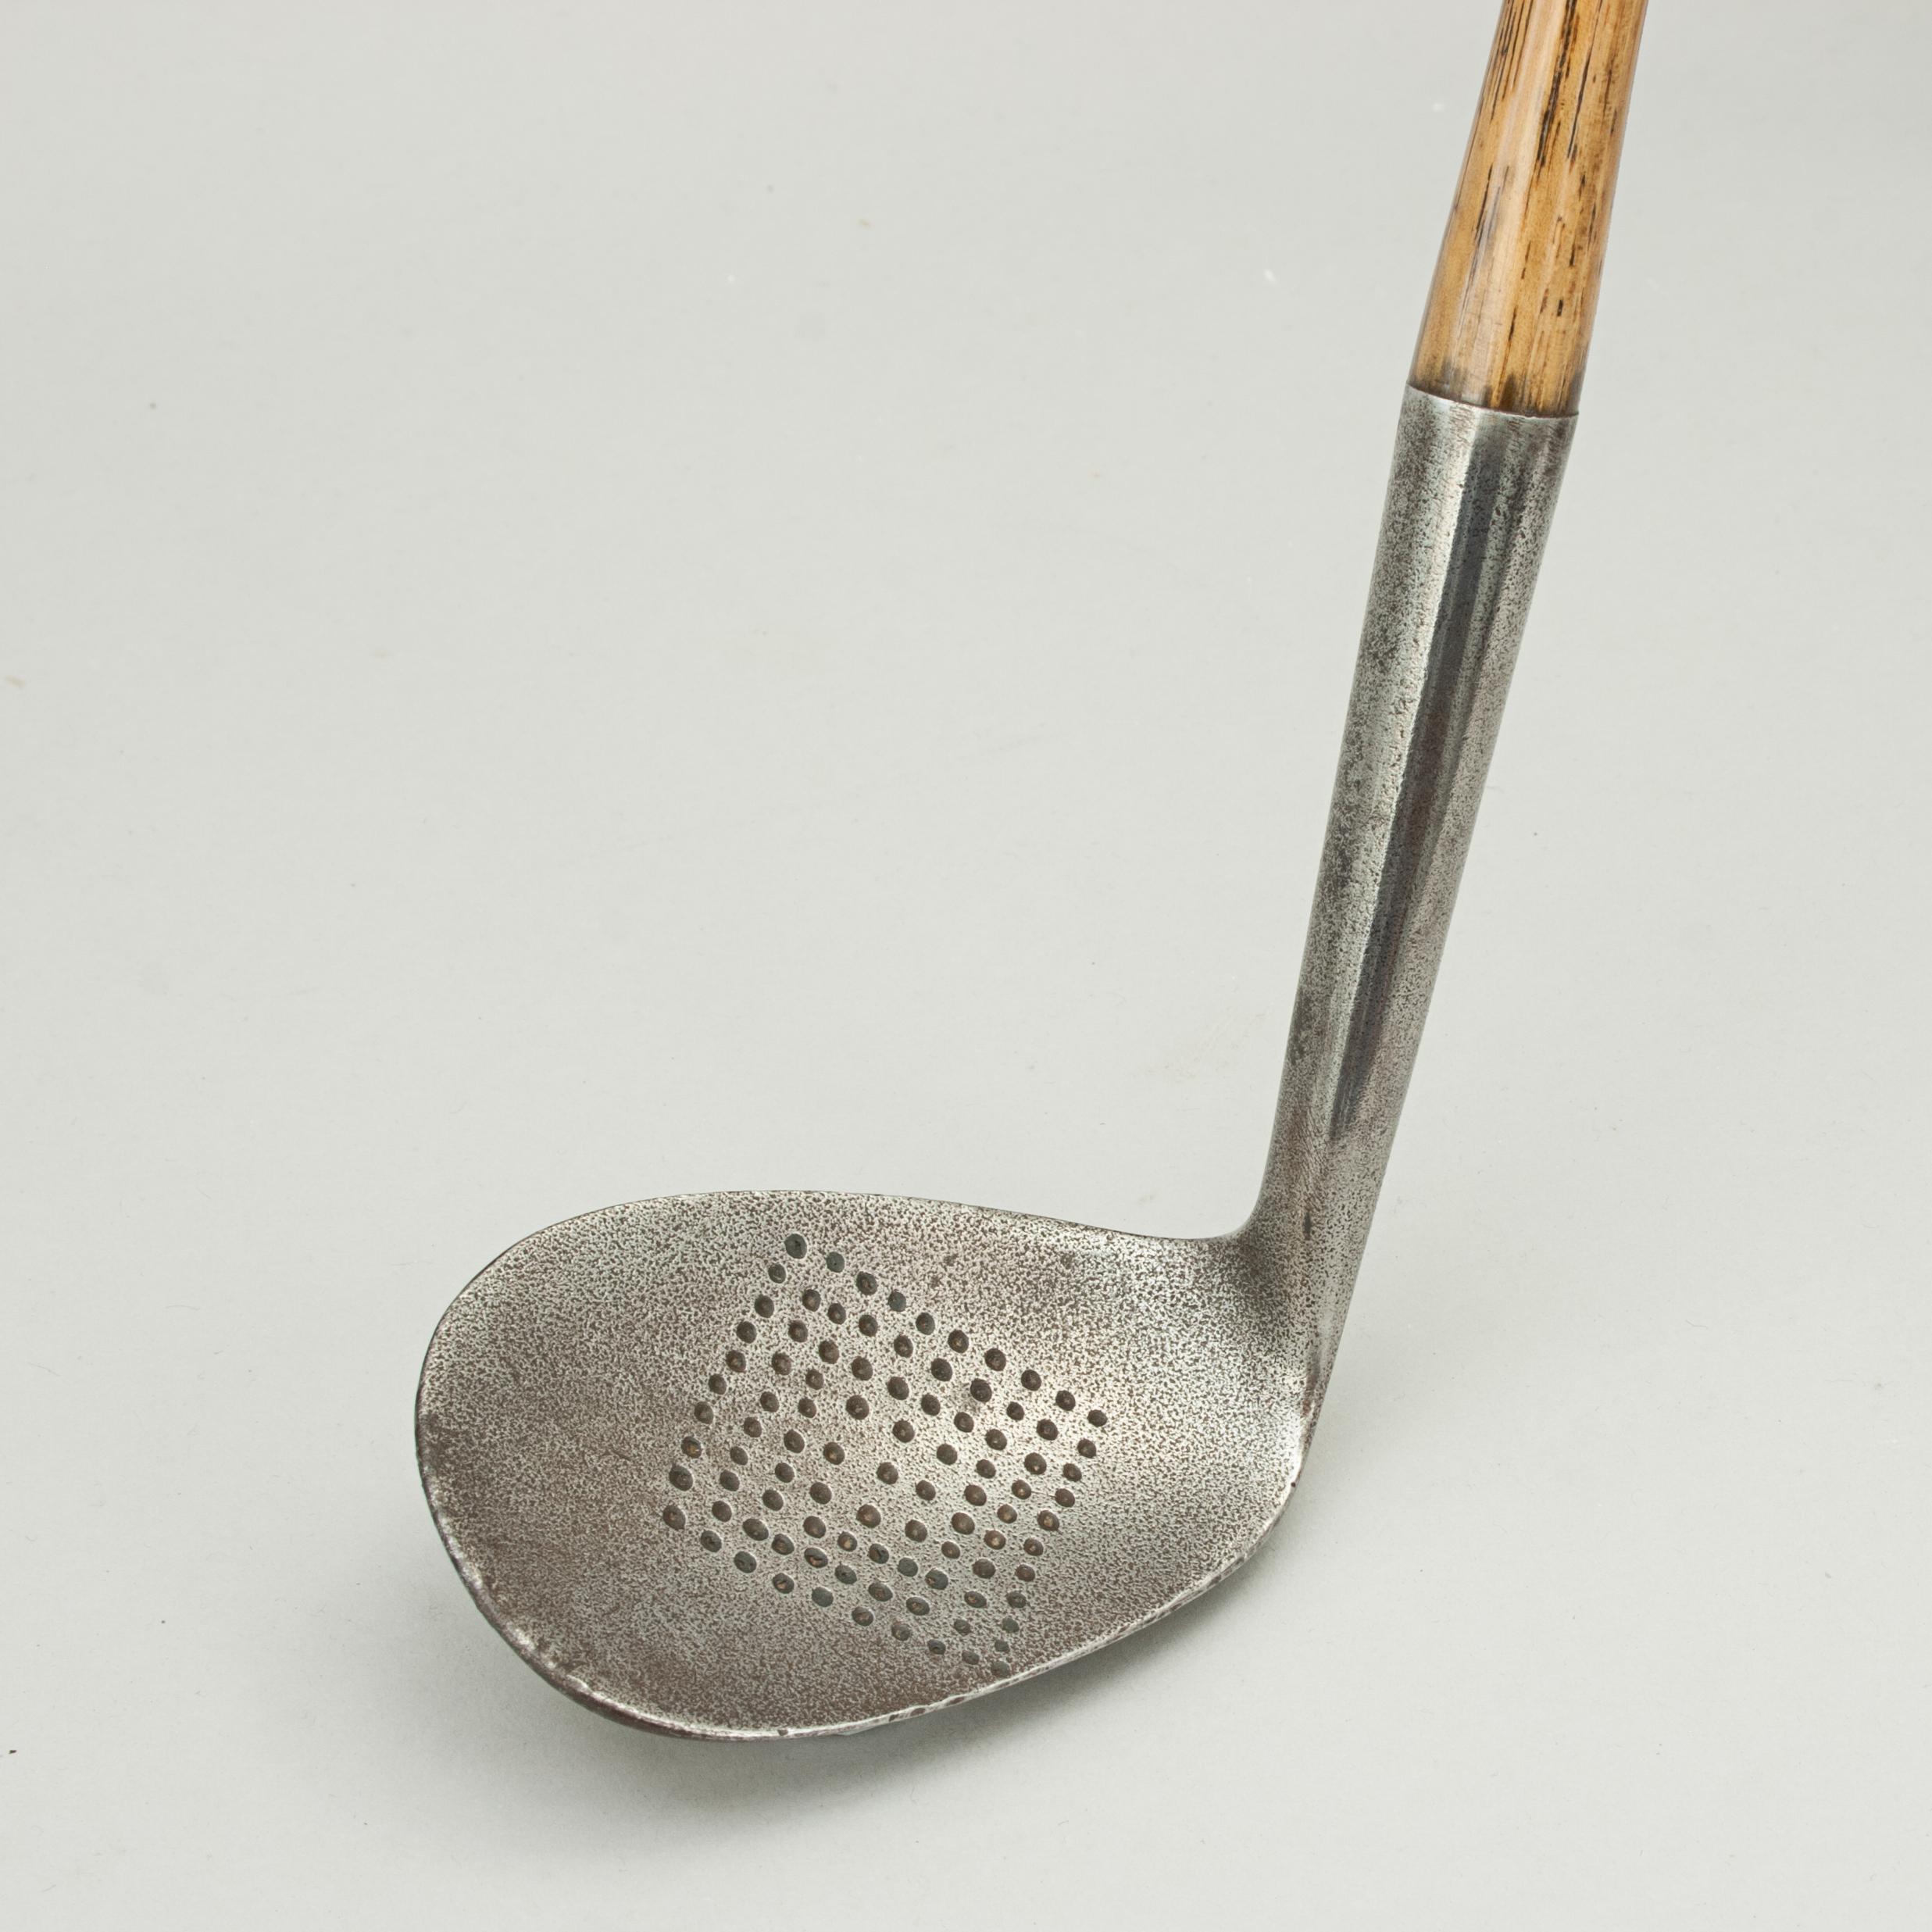 Hickory Shafted Niblick.
A good quality dish faced niblick golf club with hickory shaft. The head stamped on the back ' Special Niblick' warranted hand-forged
with a 'crossed clubs' cleek mark (possibly 'SJ Preve' runs through the cleek mark). A